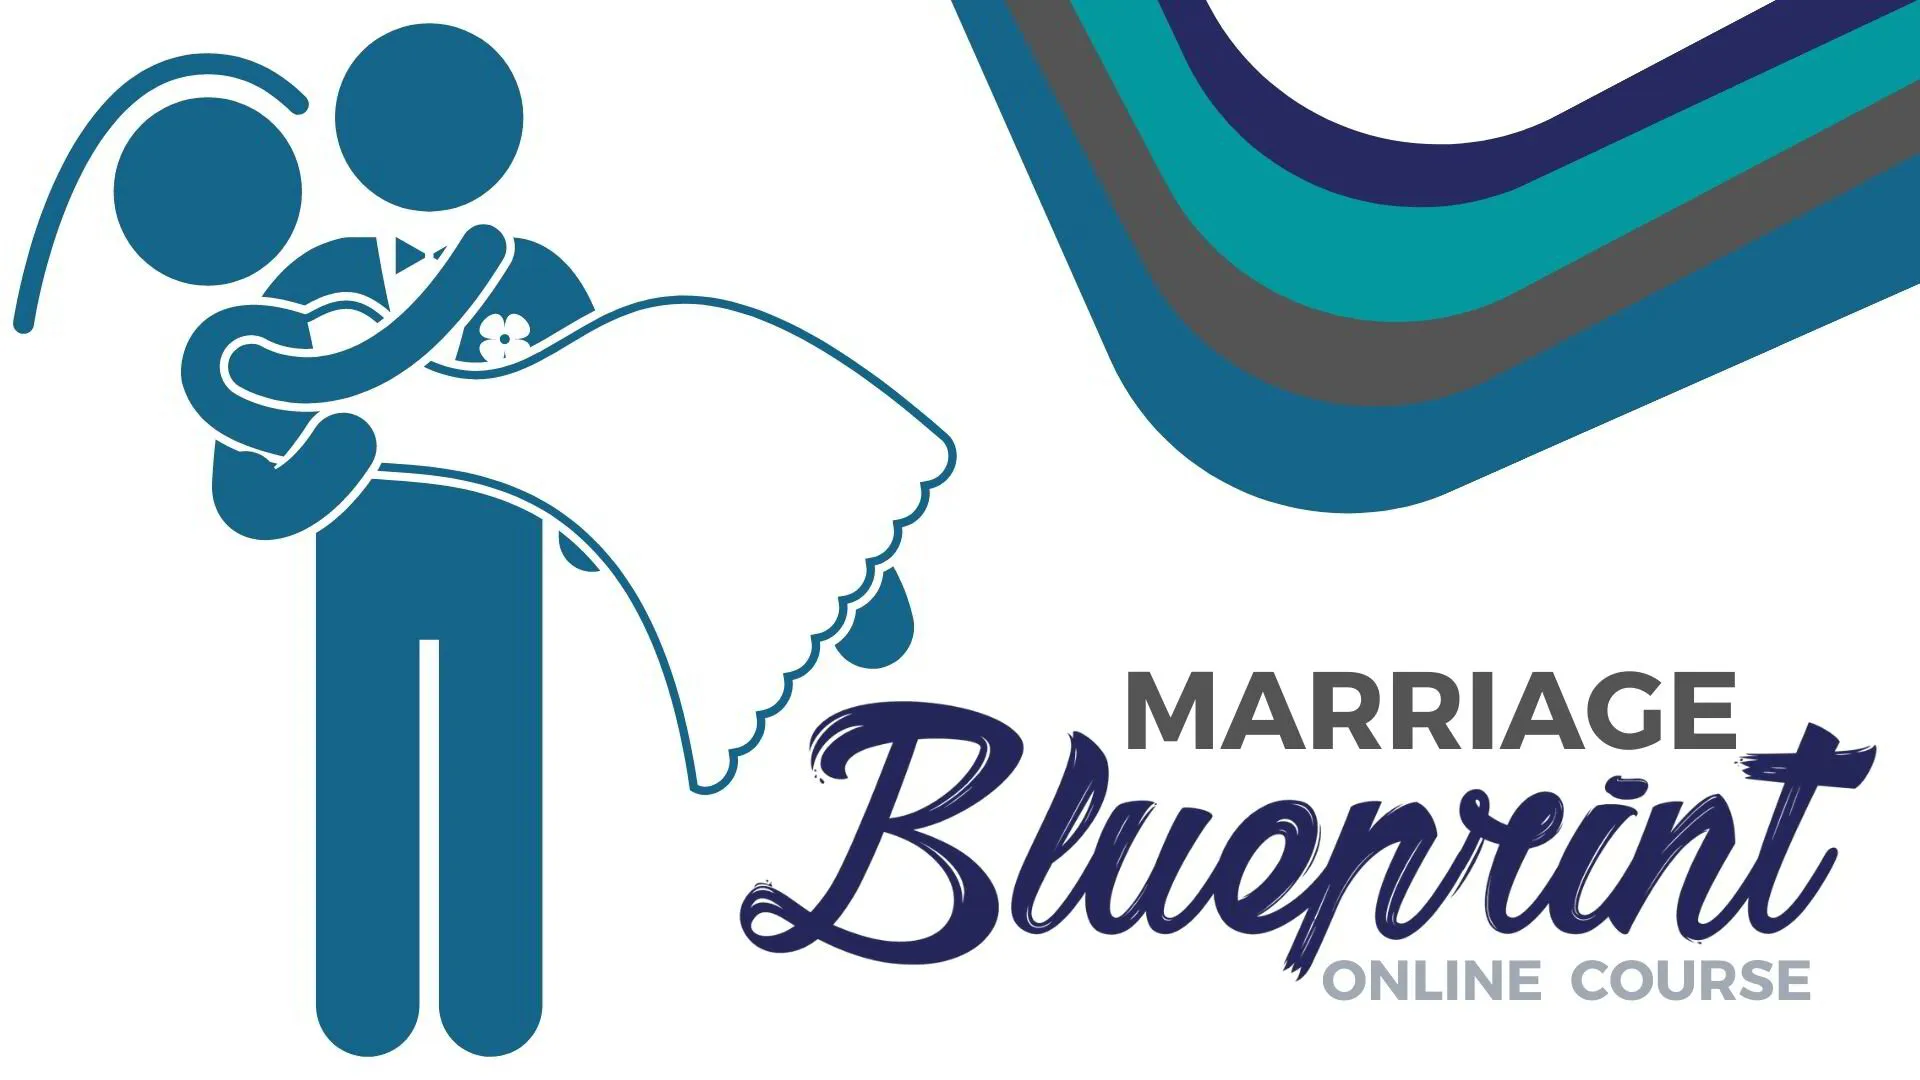 Marriage Blueprint logo with man carrying a woman